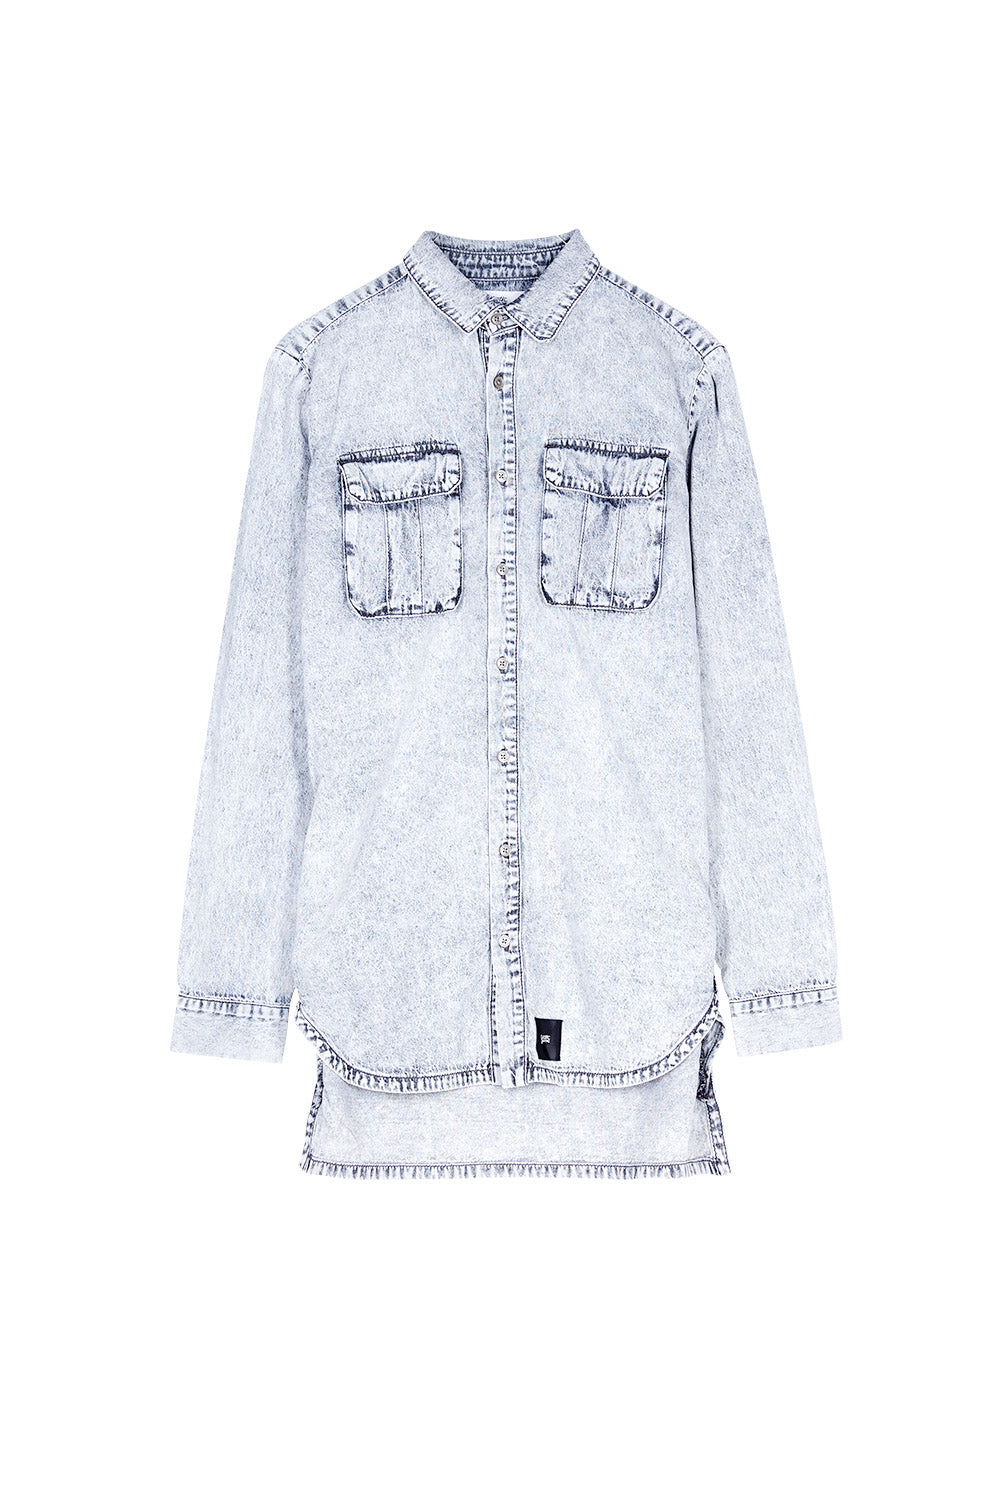 Sixth June - Chemise jean poches cargo gris